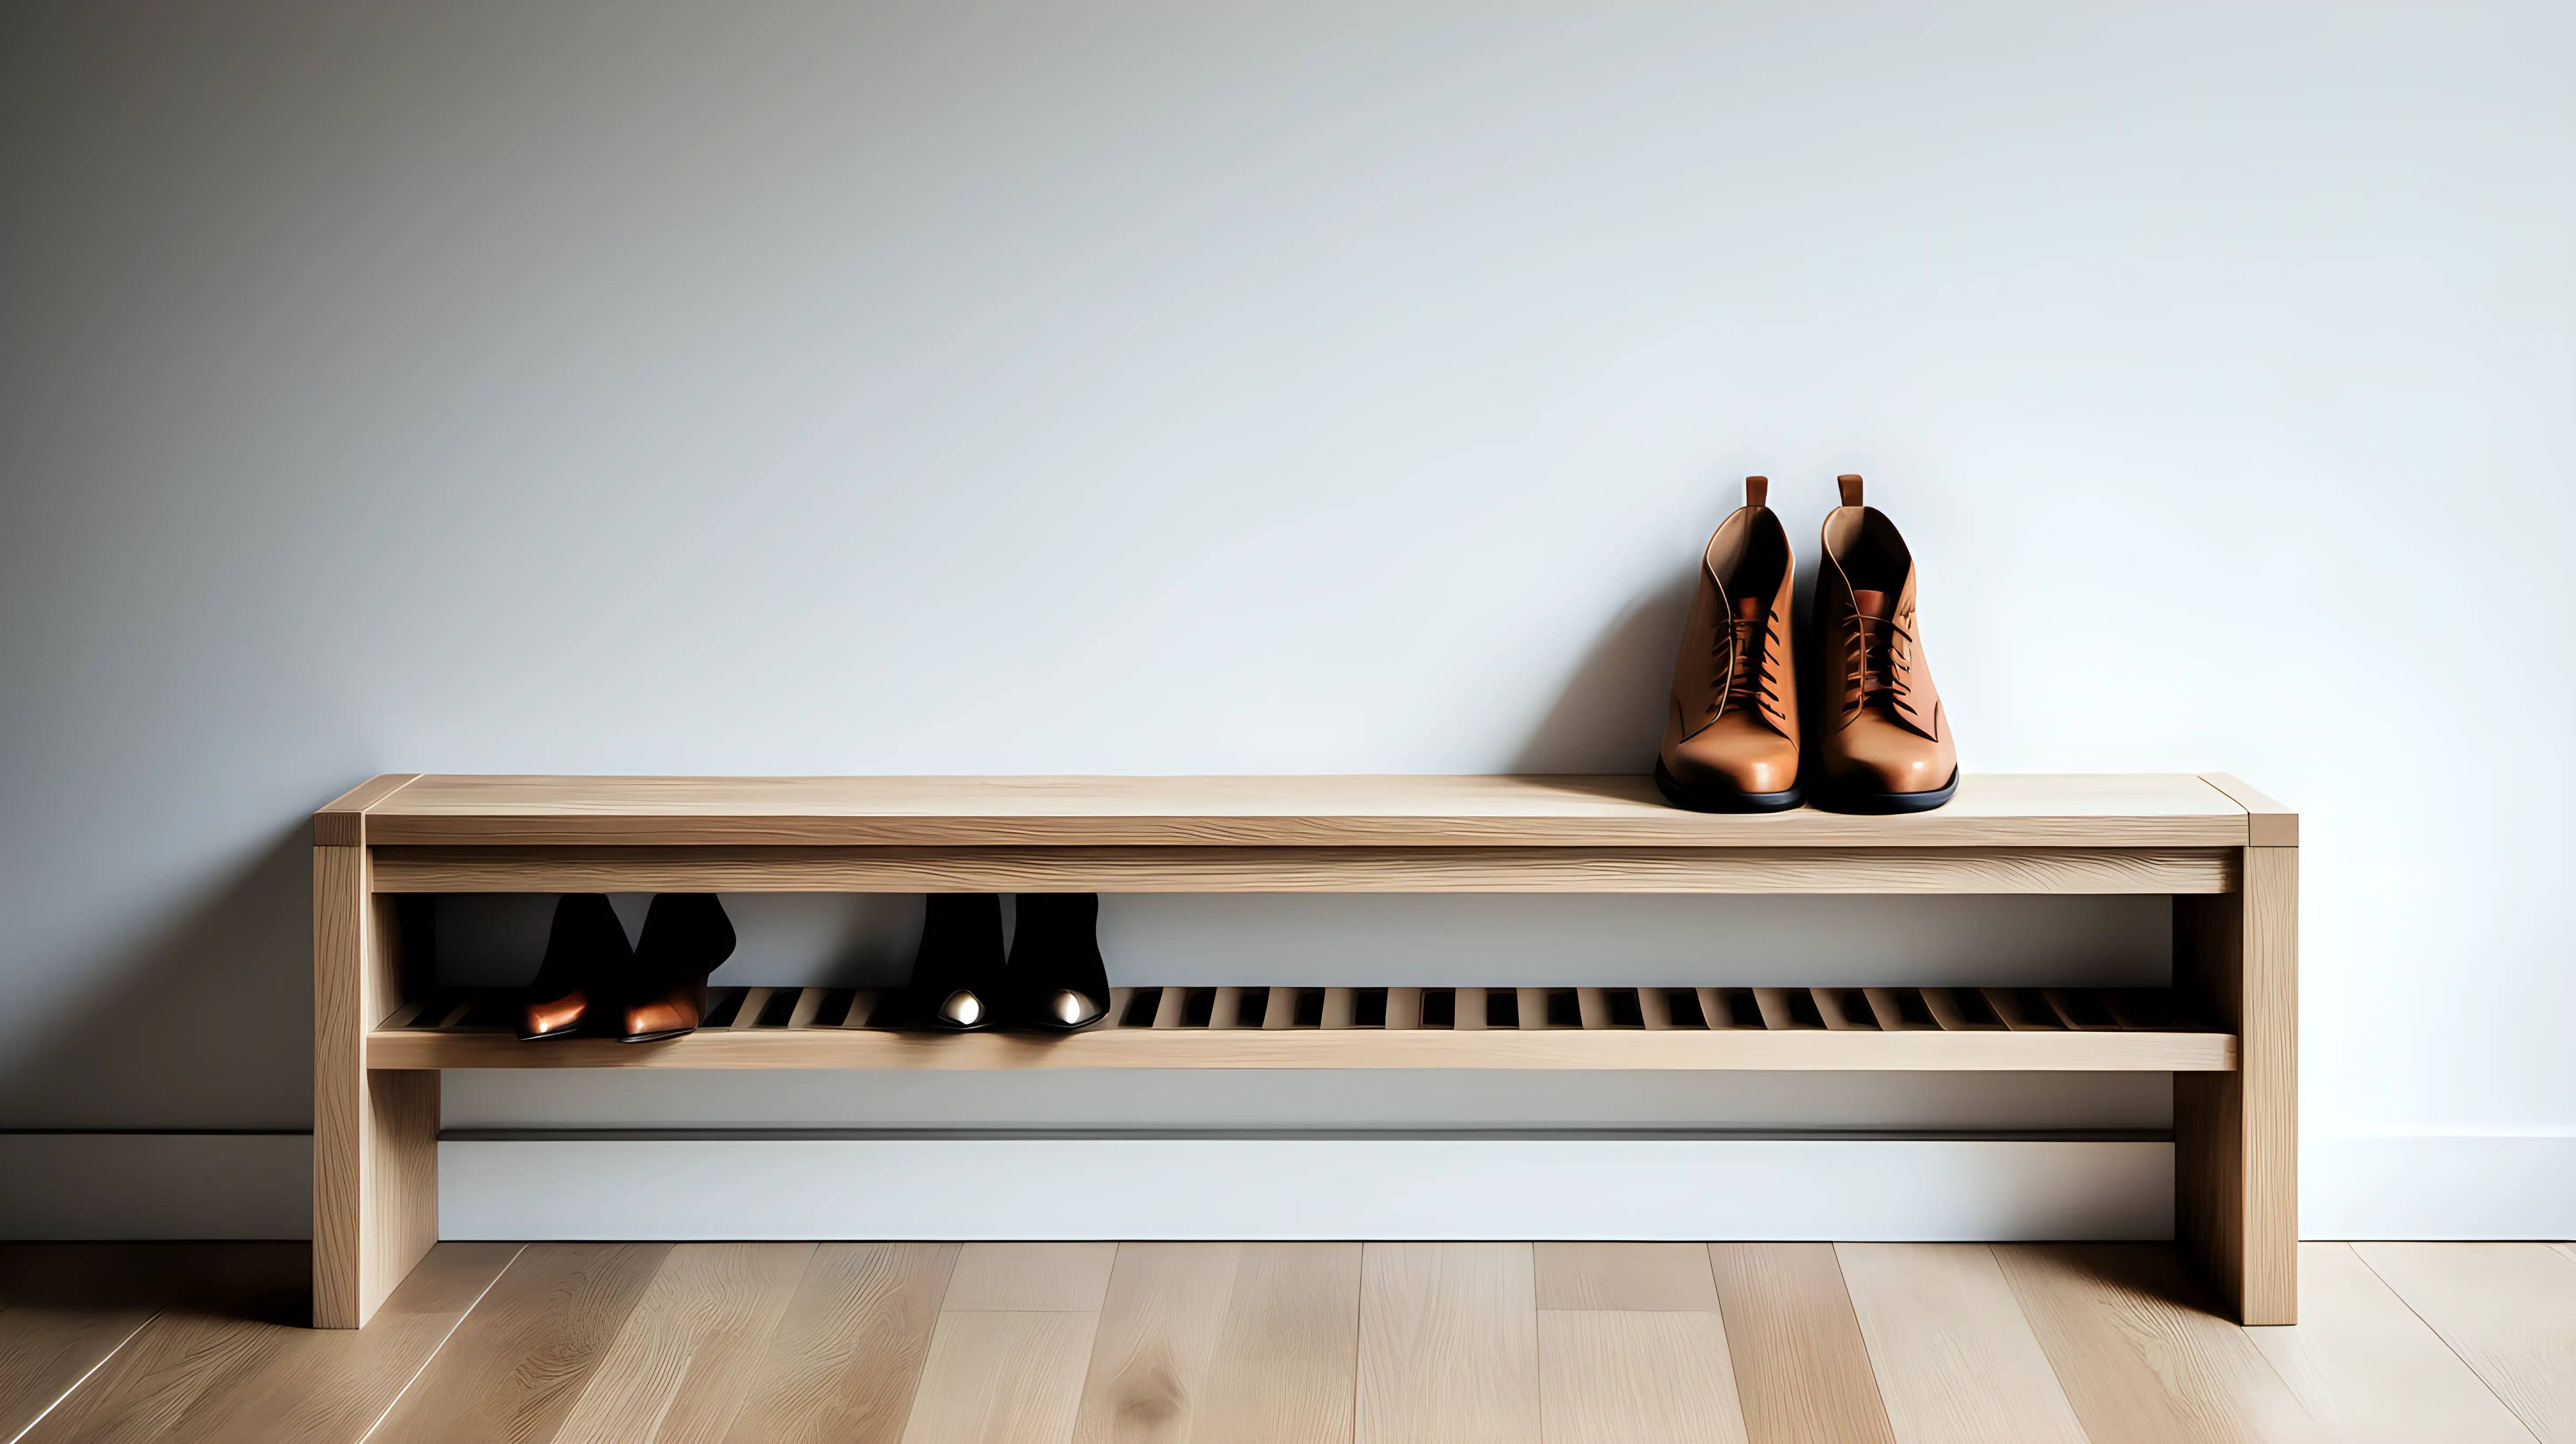 design a oak sitting bench for hall. High end carpentry. One shoe rack under the bench. Nordic minimalist design

